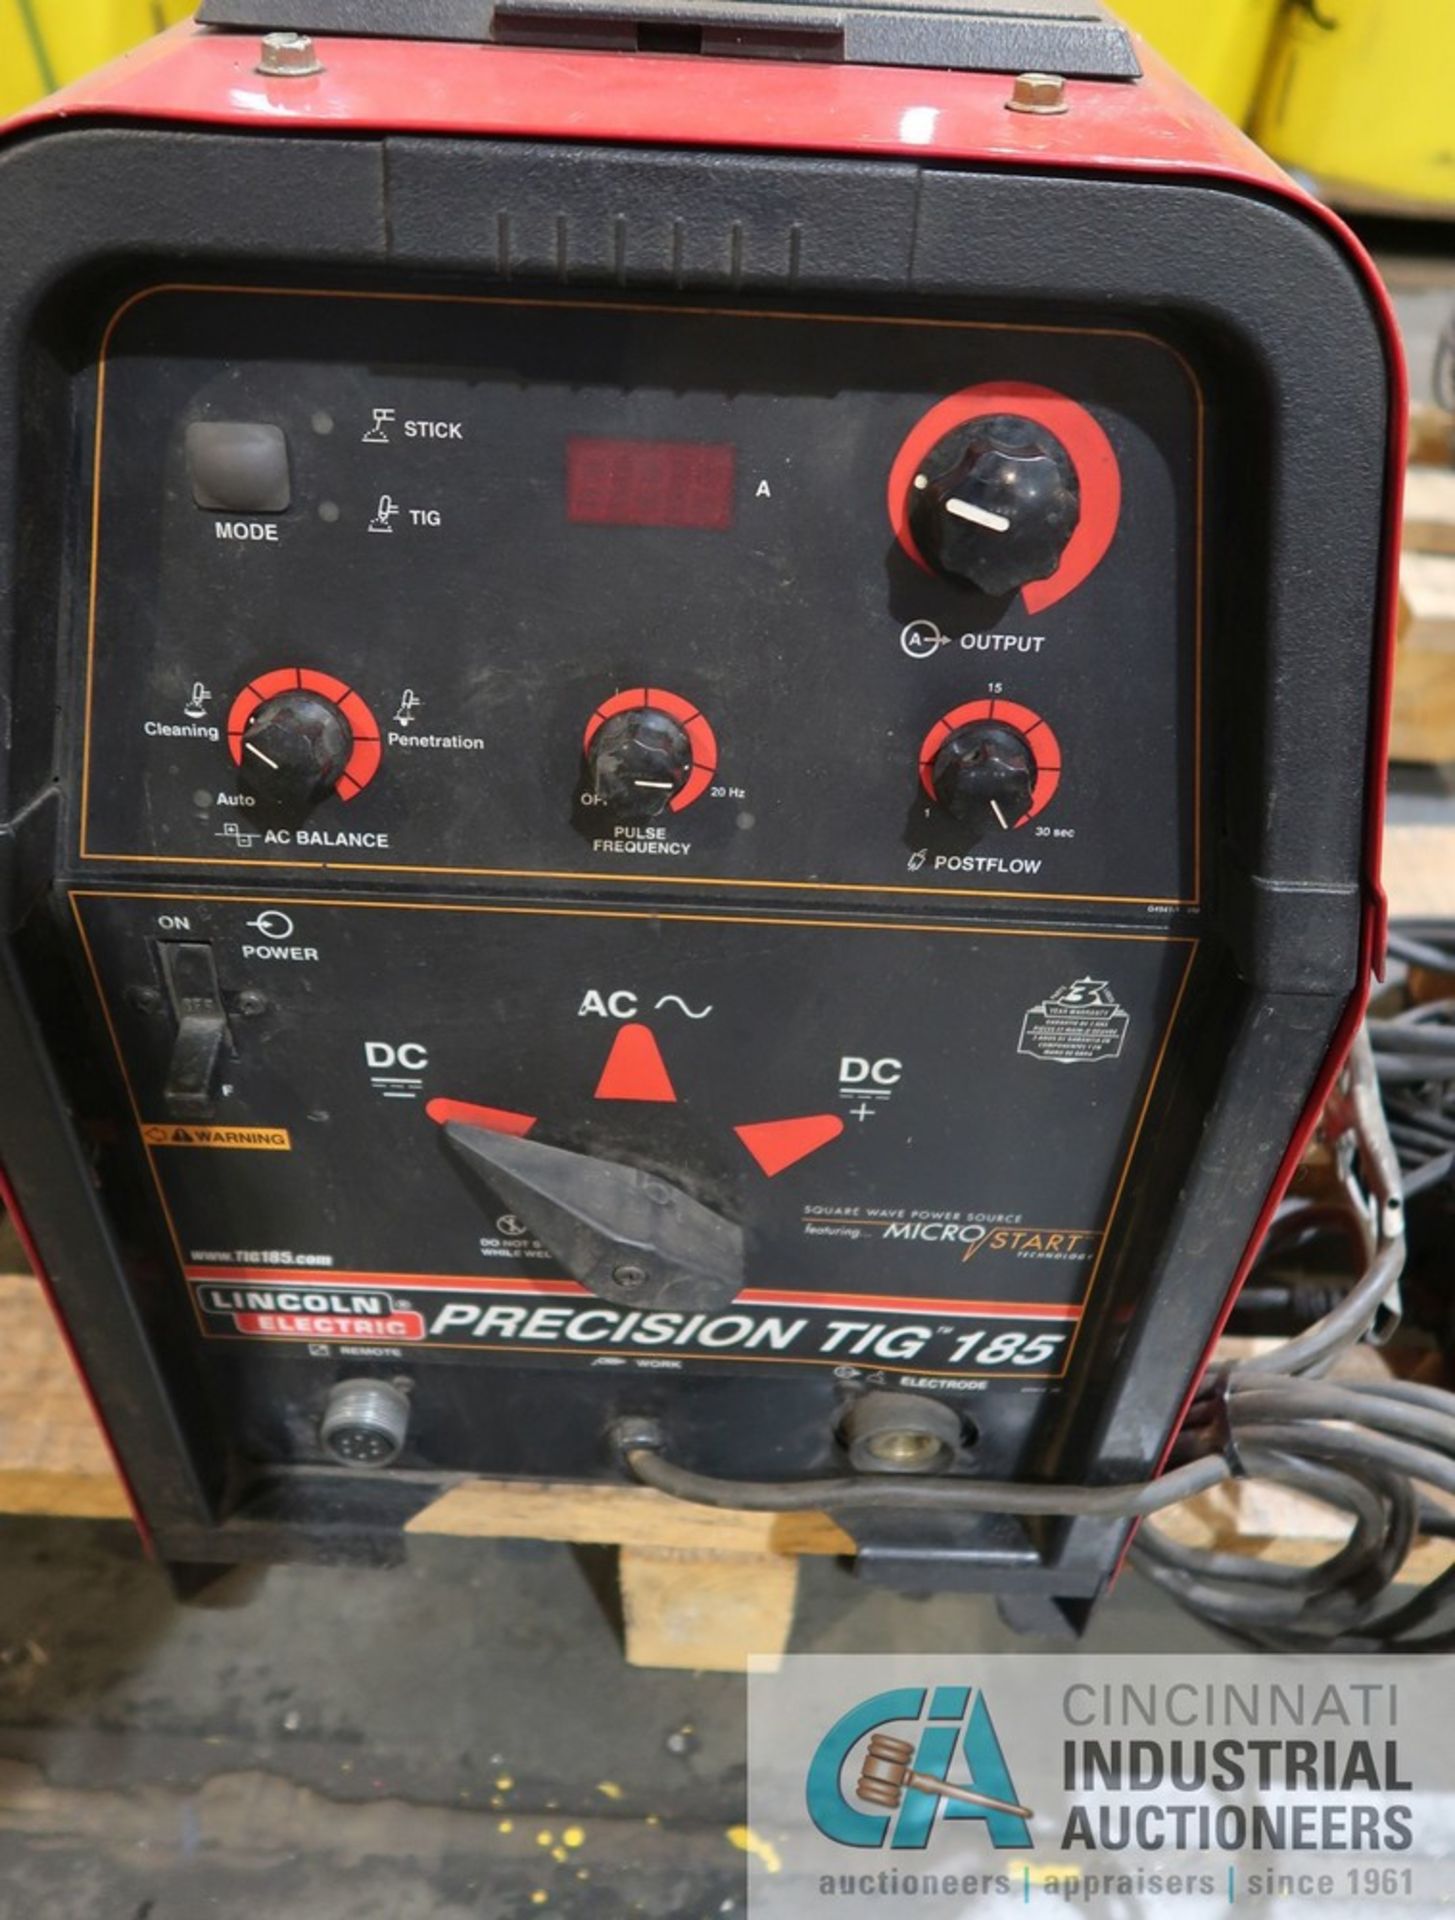 185 AMP LINCOLN ELECTRIC PRECISION TIG 185 WELDING POWER SOURCE; S/N U1050612910 - Image 3 of 3